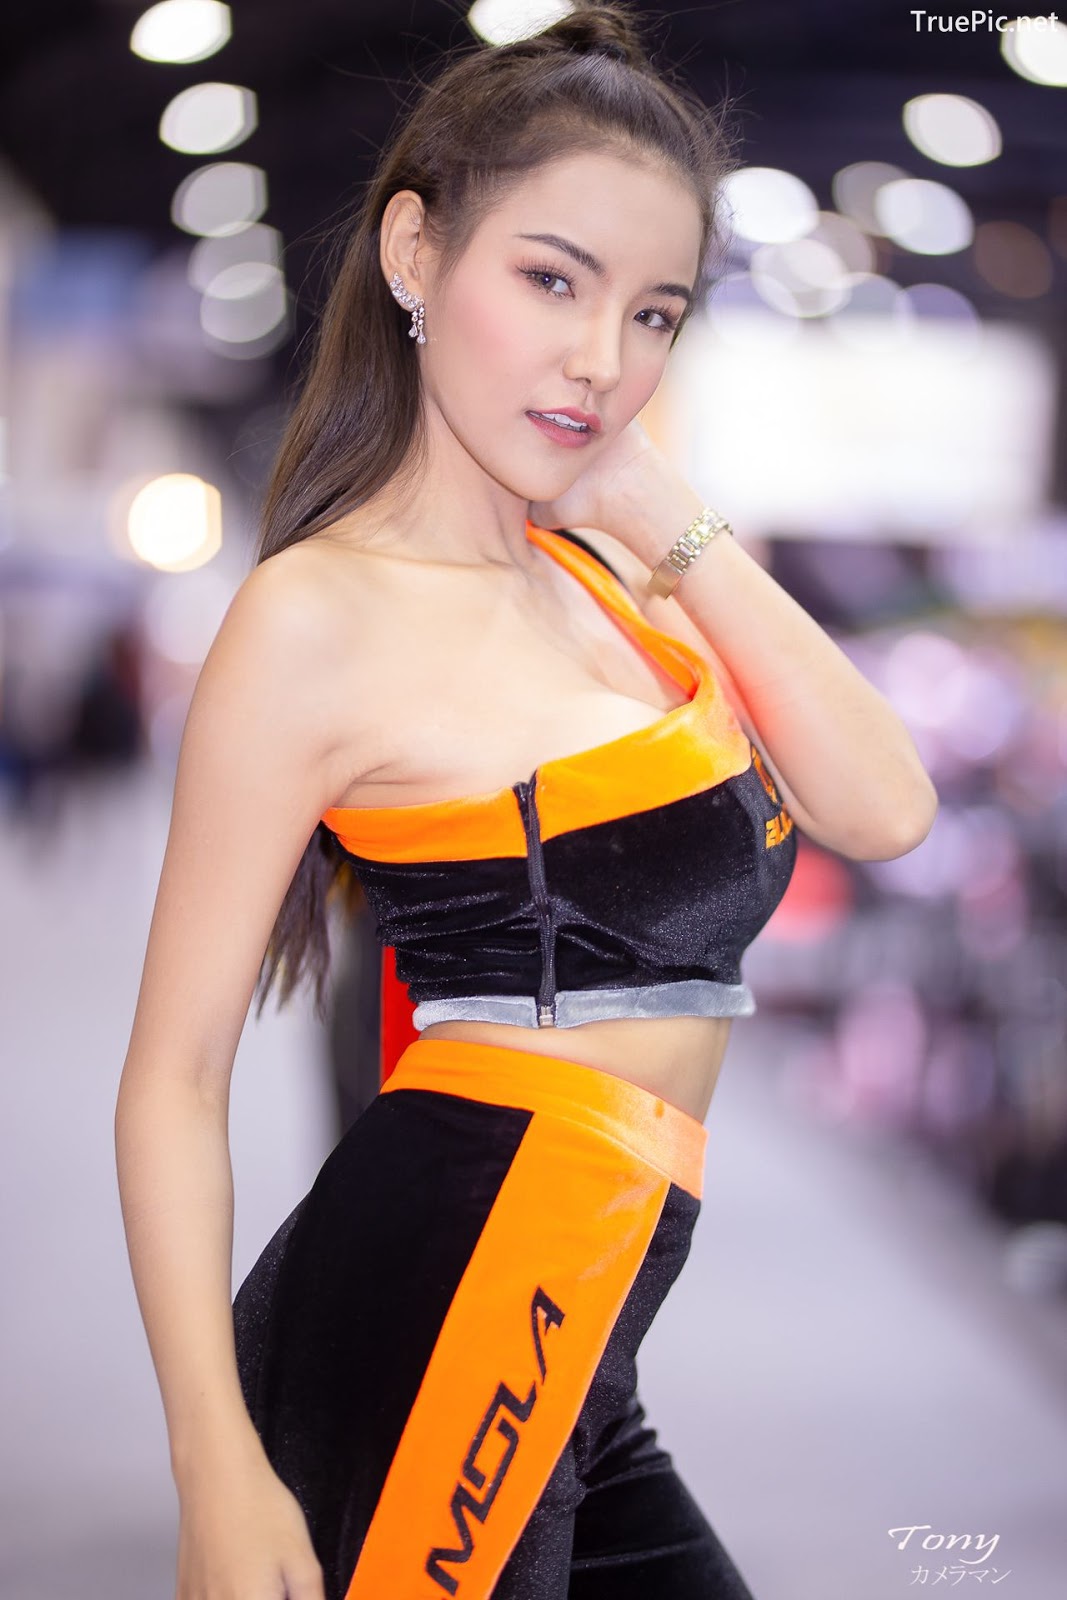 Image-Thailand-Hot-Model-Thai-Racing-Girl-At-Motor-Expo-2019-TruePic.net- Picture-98